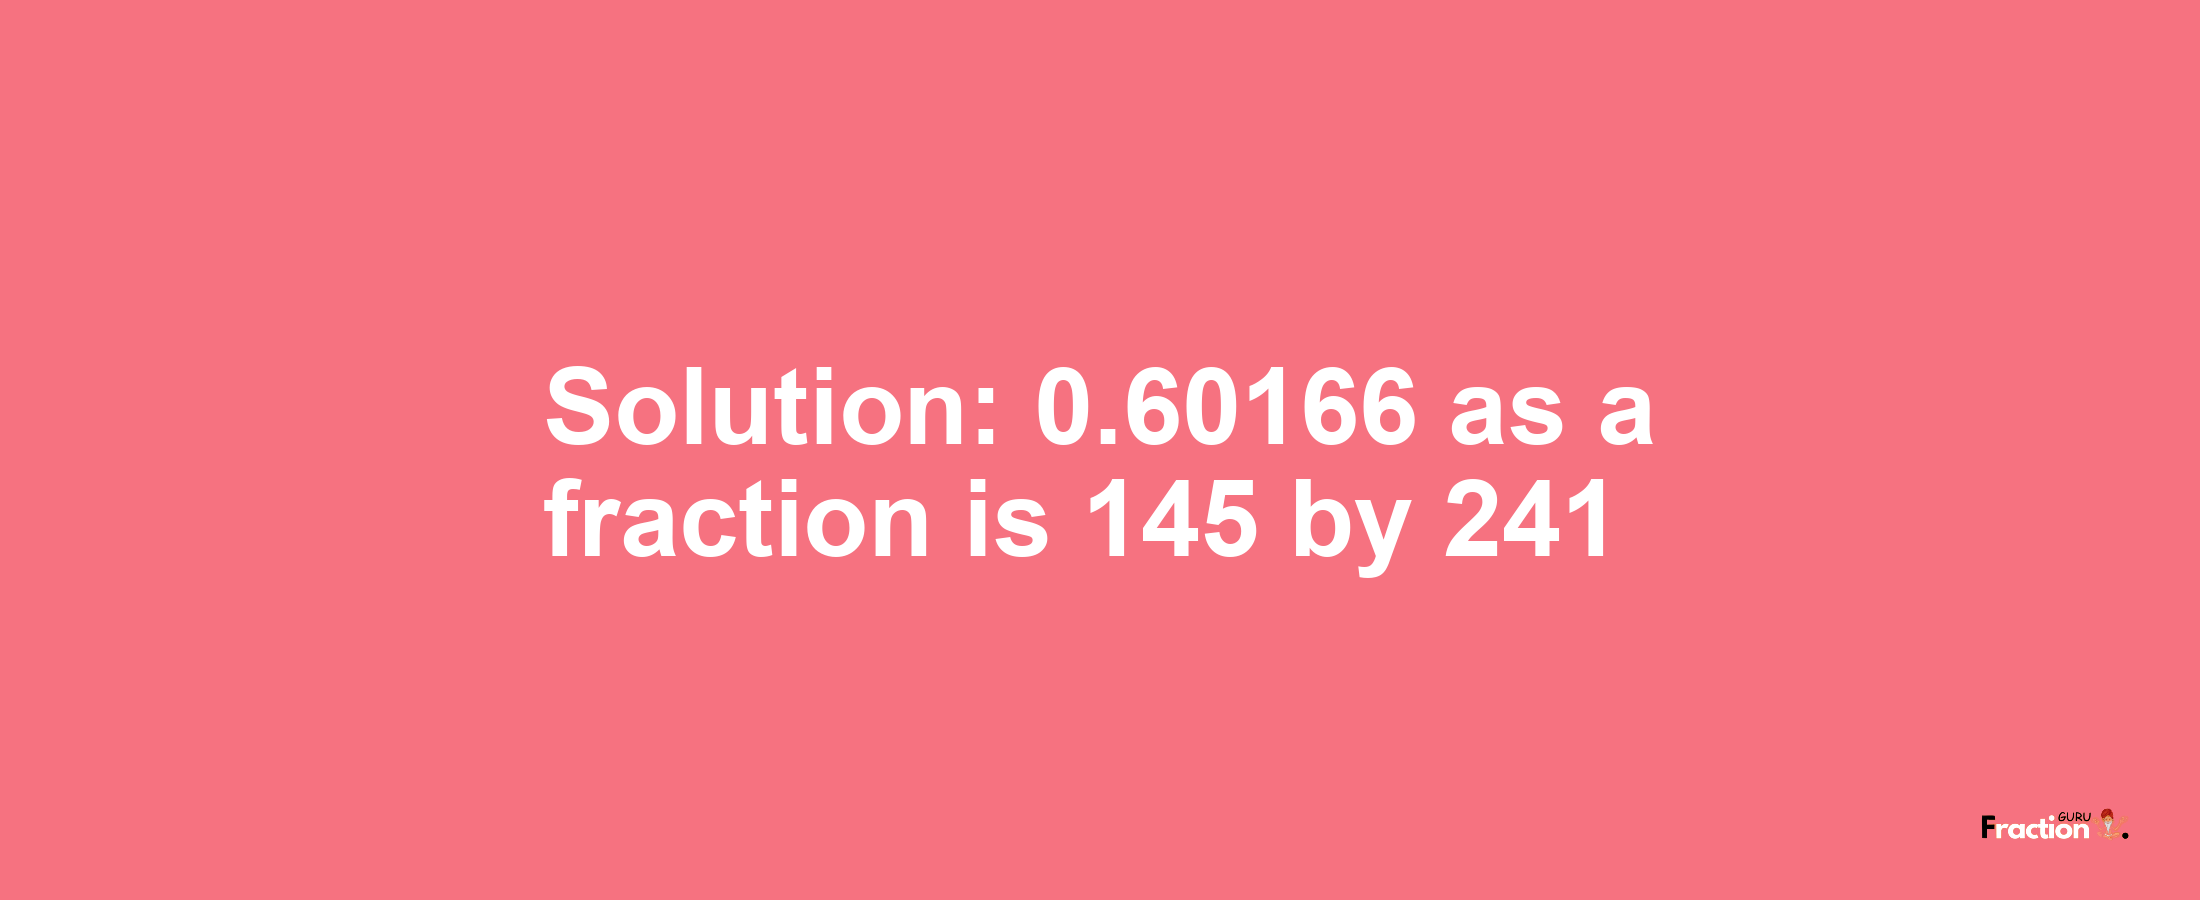 Solution:0.60166 as a fraction is 145/241